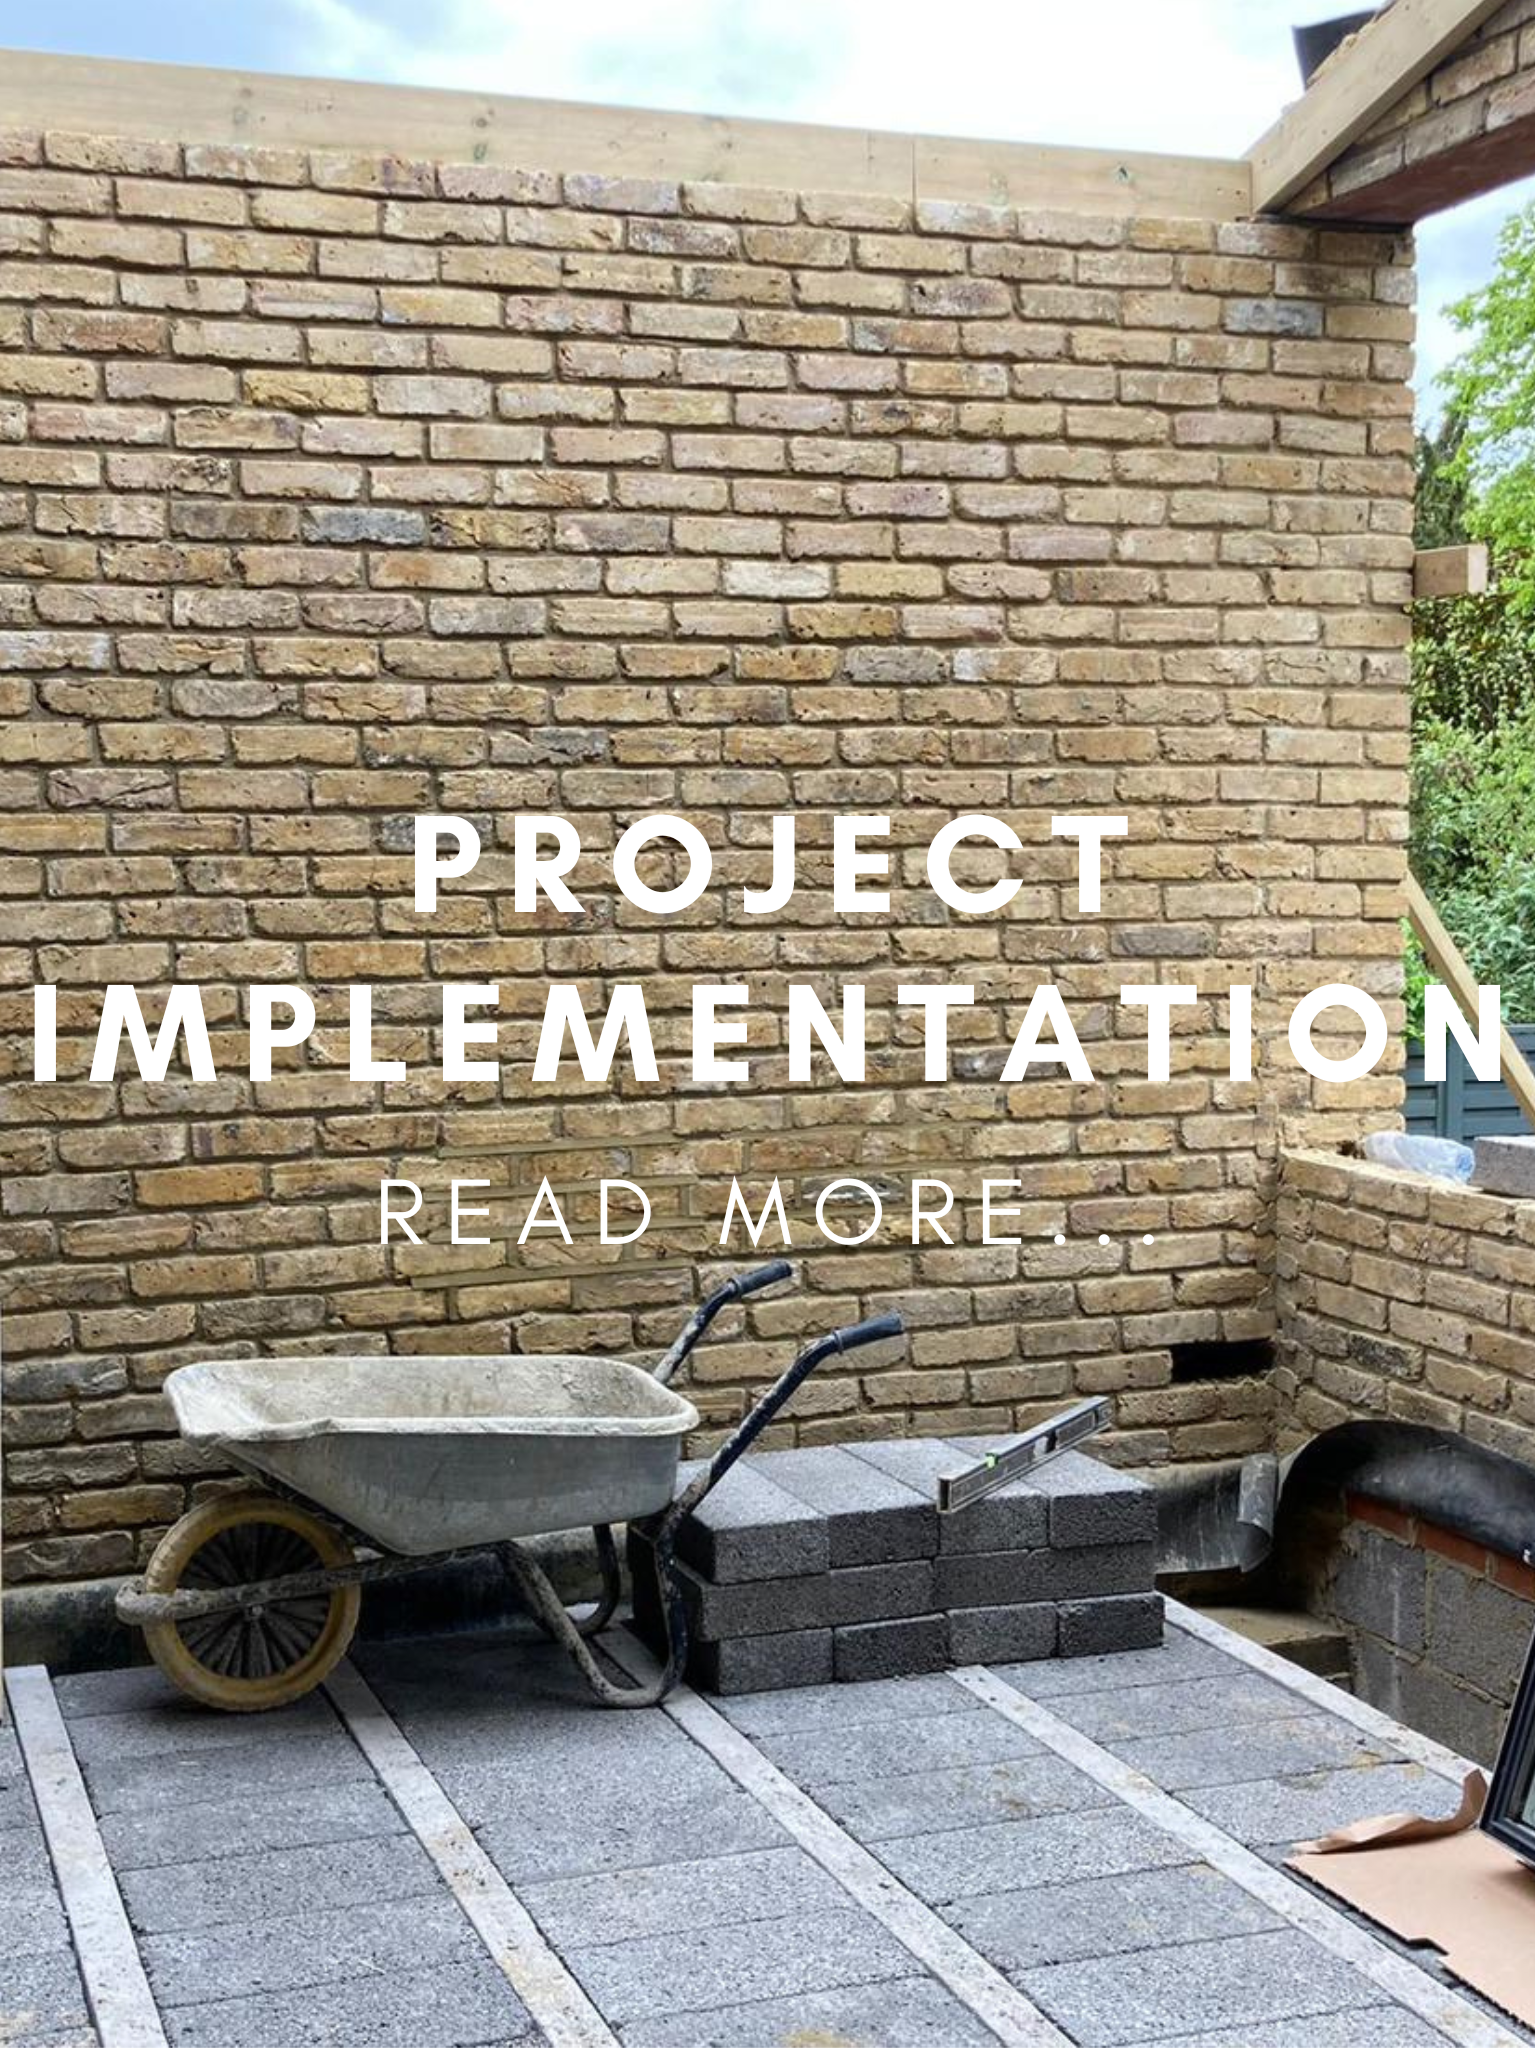 PROJECT IMPLEMENTATION